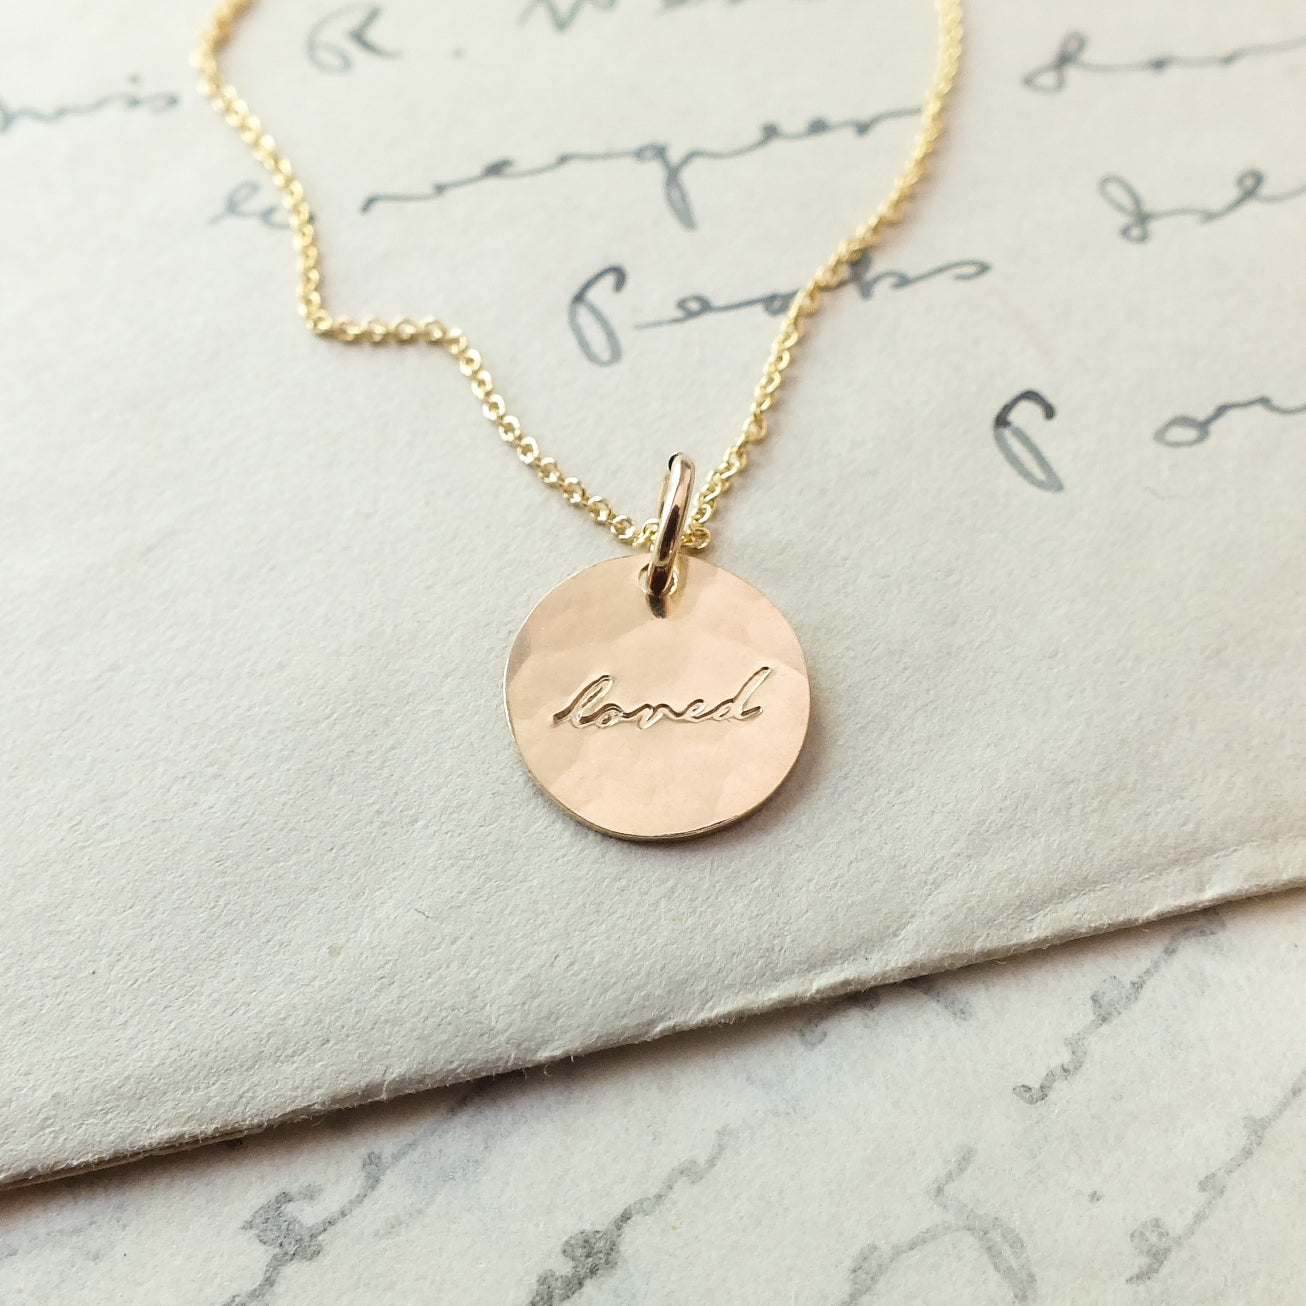 Becoming Jewelry&#39;s Loved Necklace, a sterling silver pendant necklace with the word &#39;laugh&#39; engraved, lying on a handwritten letter.